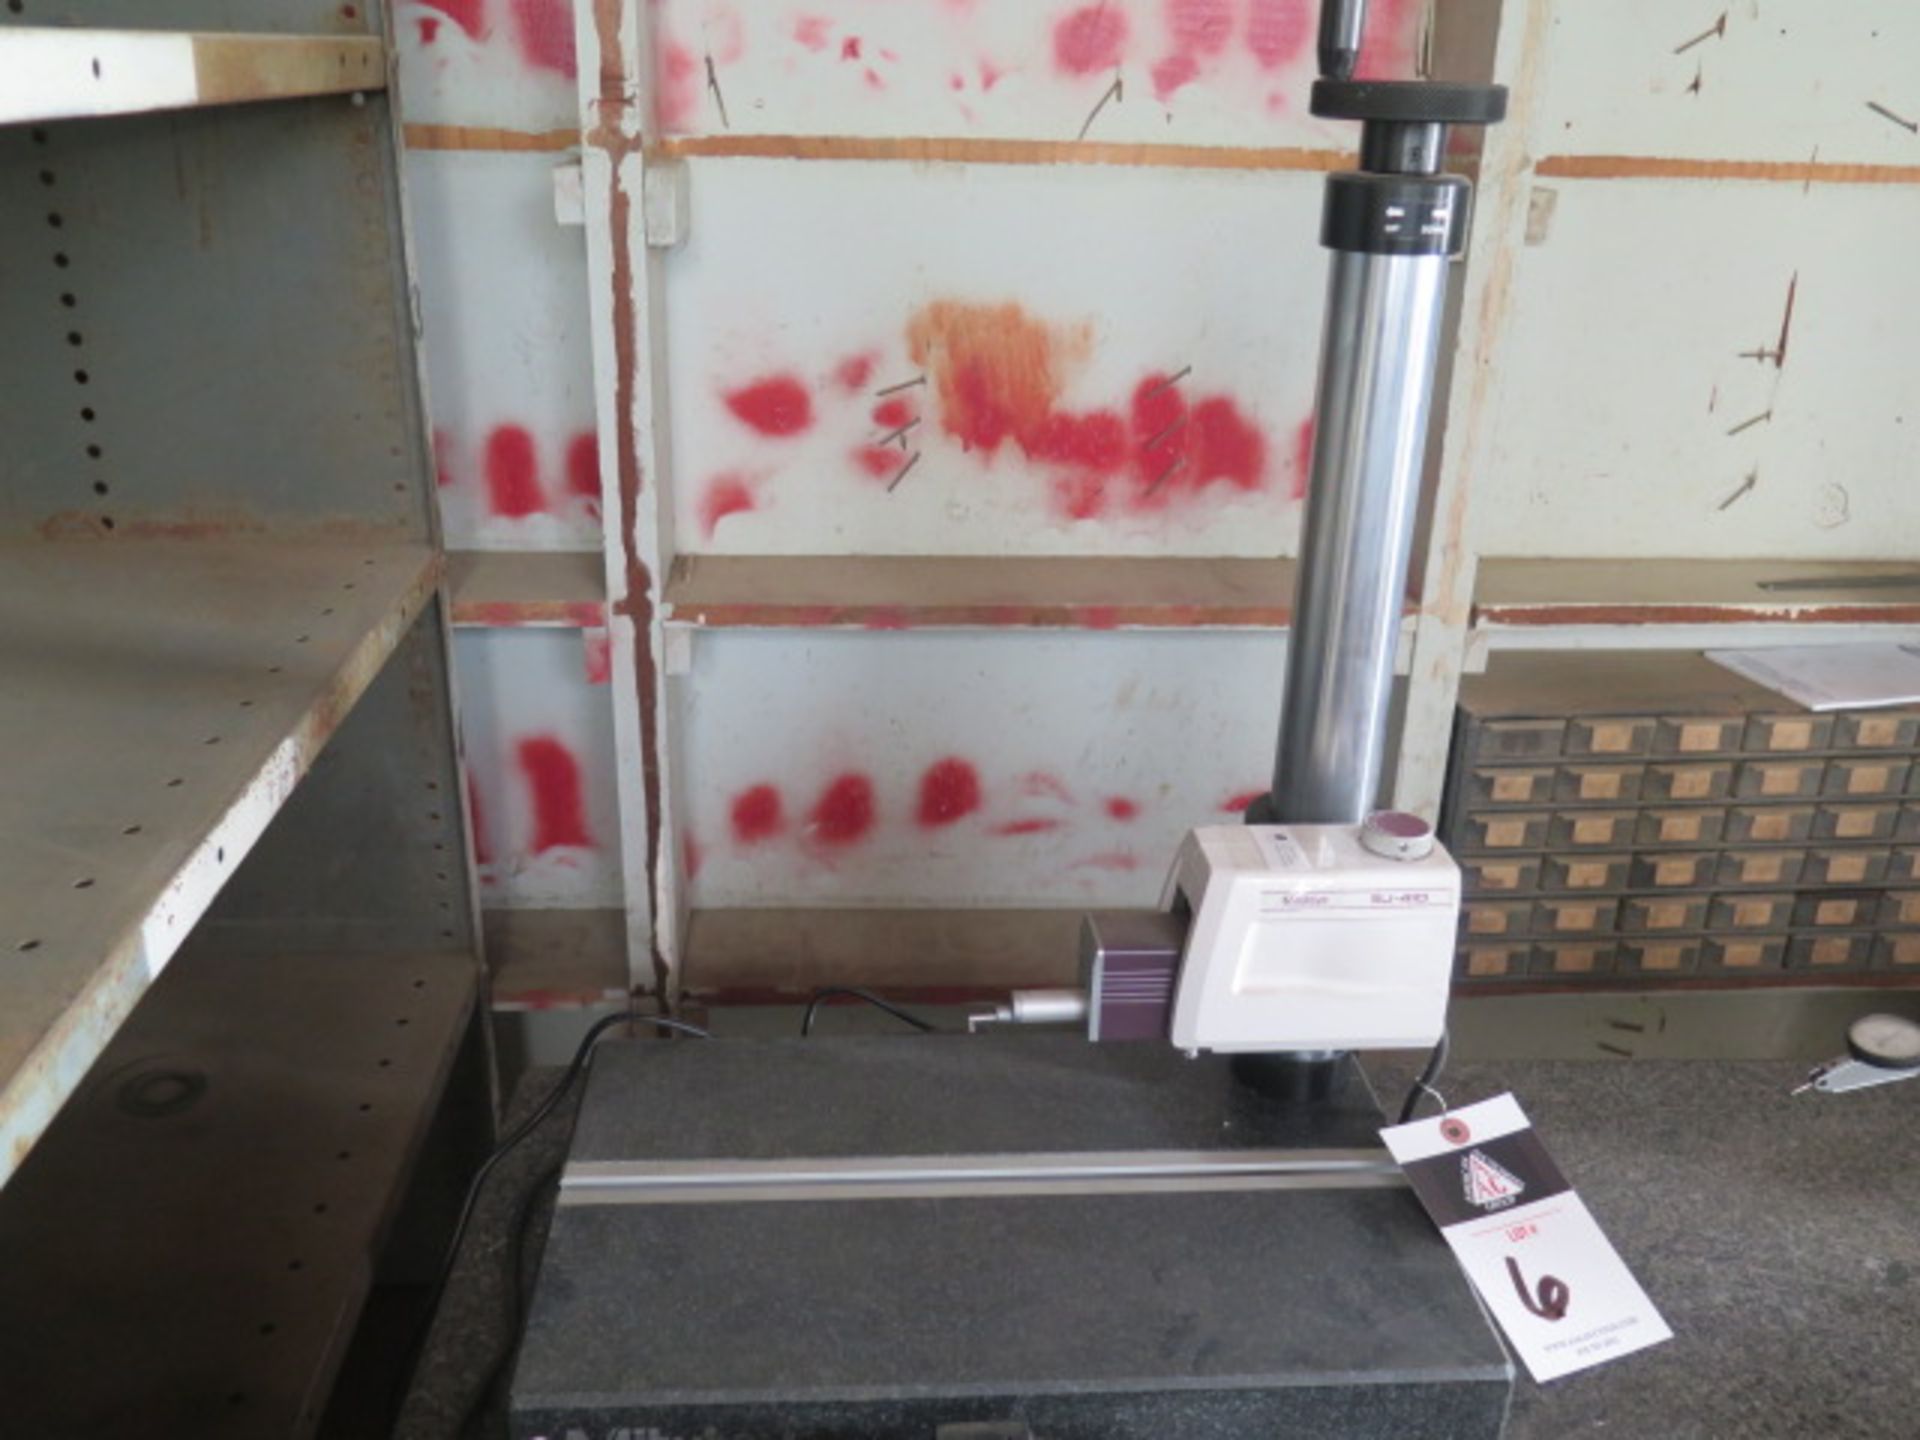 Mitutoyo SJ-410 Surface Roughness Gage w/ Digital Controls, Printer, 10” x 16” Granite SOLD AS IS - Image 2 of 5